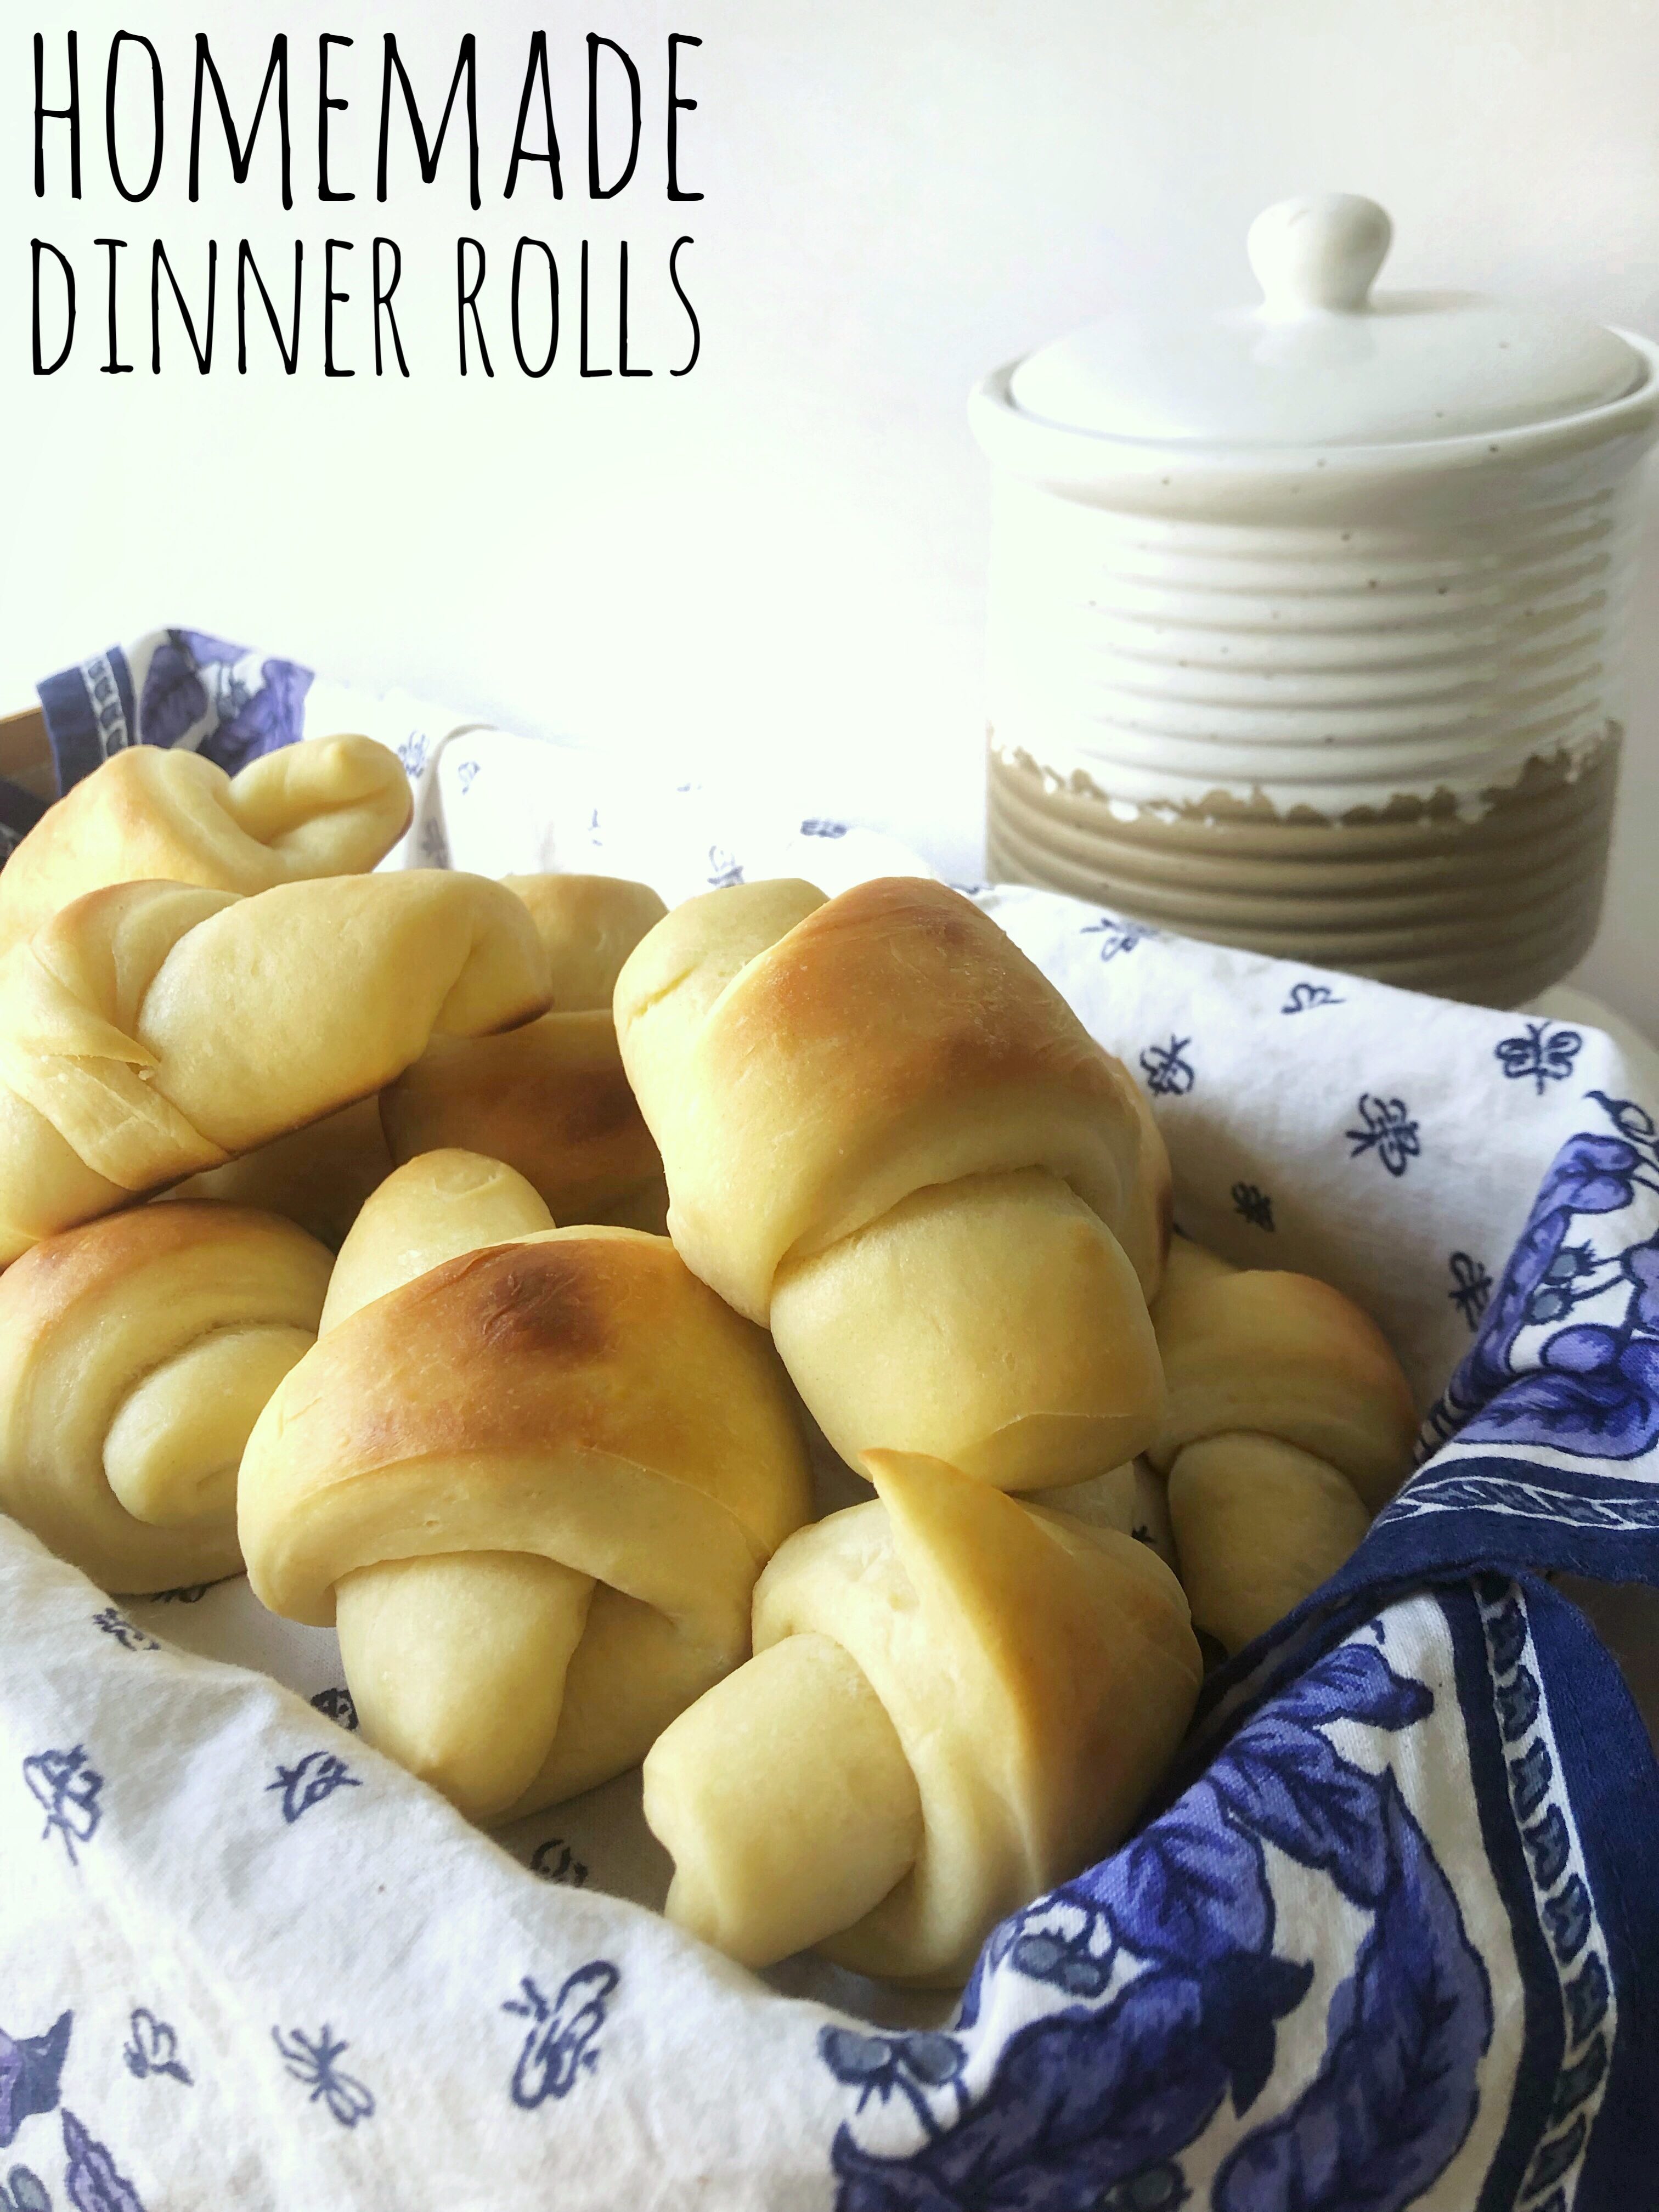 basket of homemade dinner rolls with blue and white napkin. Title.